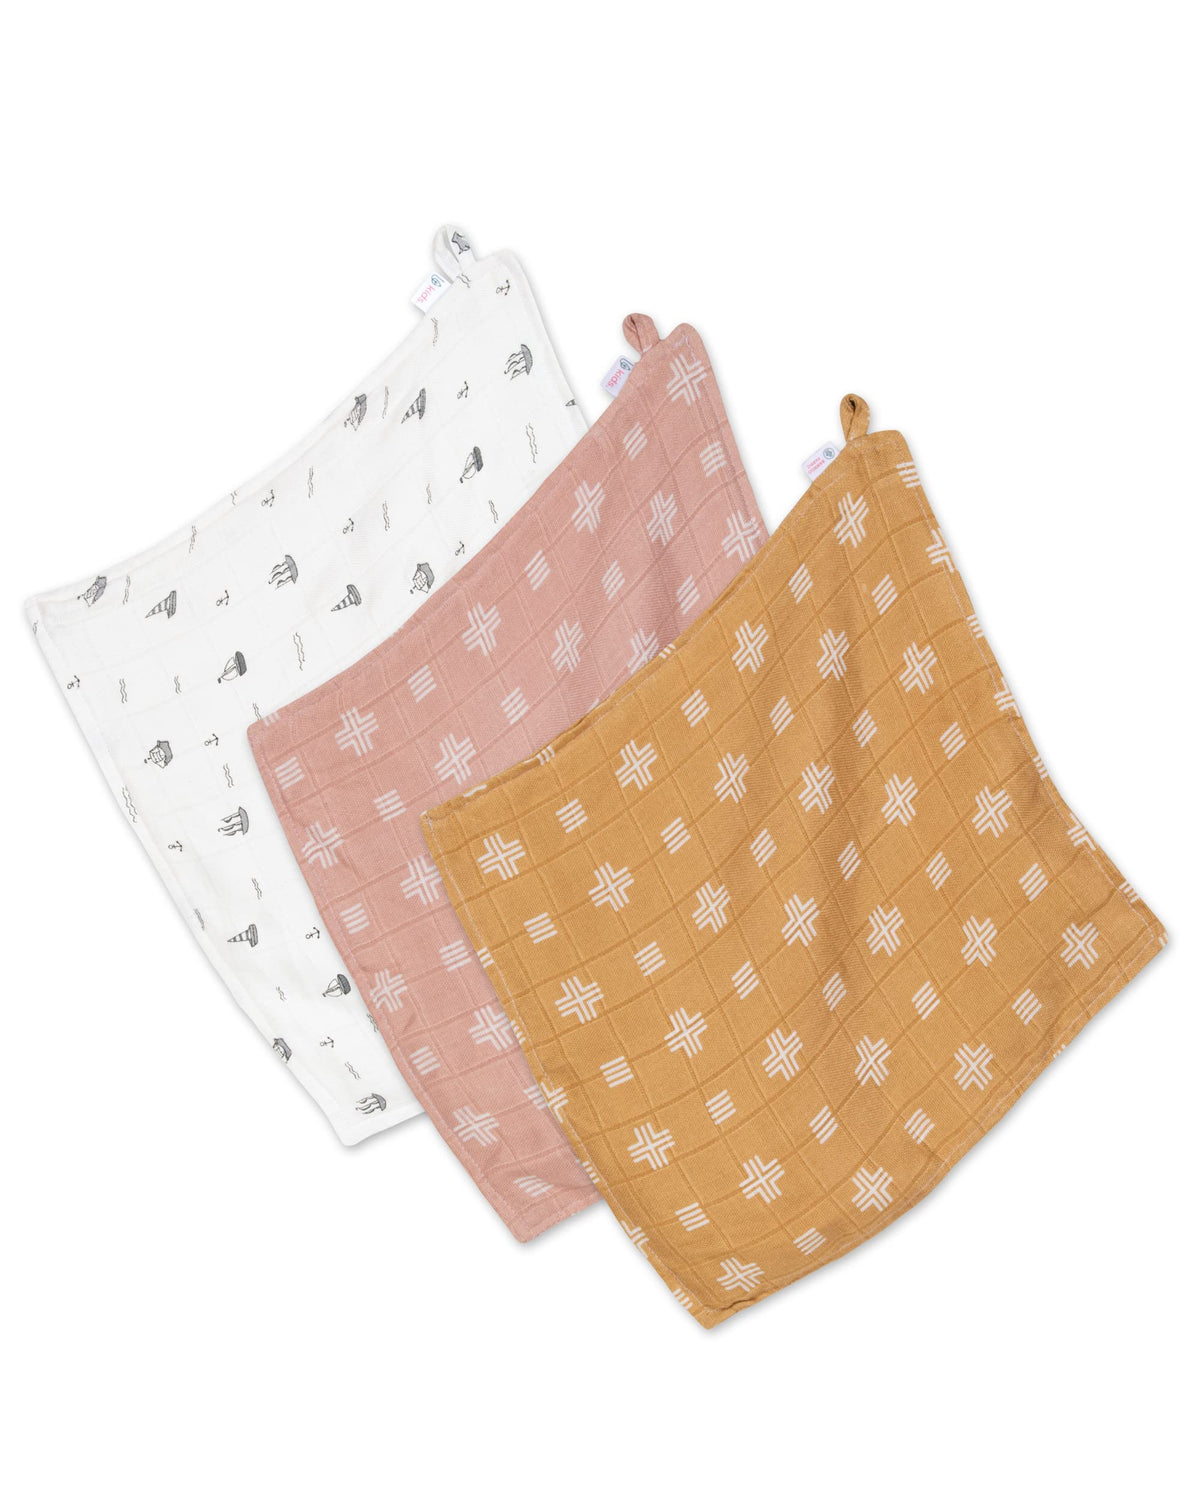 Mush Super Soft 100% Bamboo Washcloth/Reusable Baby Wipes/Baby Towel for New Born || Two-Layered || Absorbent, Anti-Microbial, Sensitive Skin Friendly (3, Sea Grey, Geo Peach, Geo Mustard)